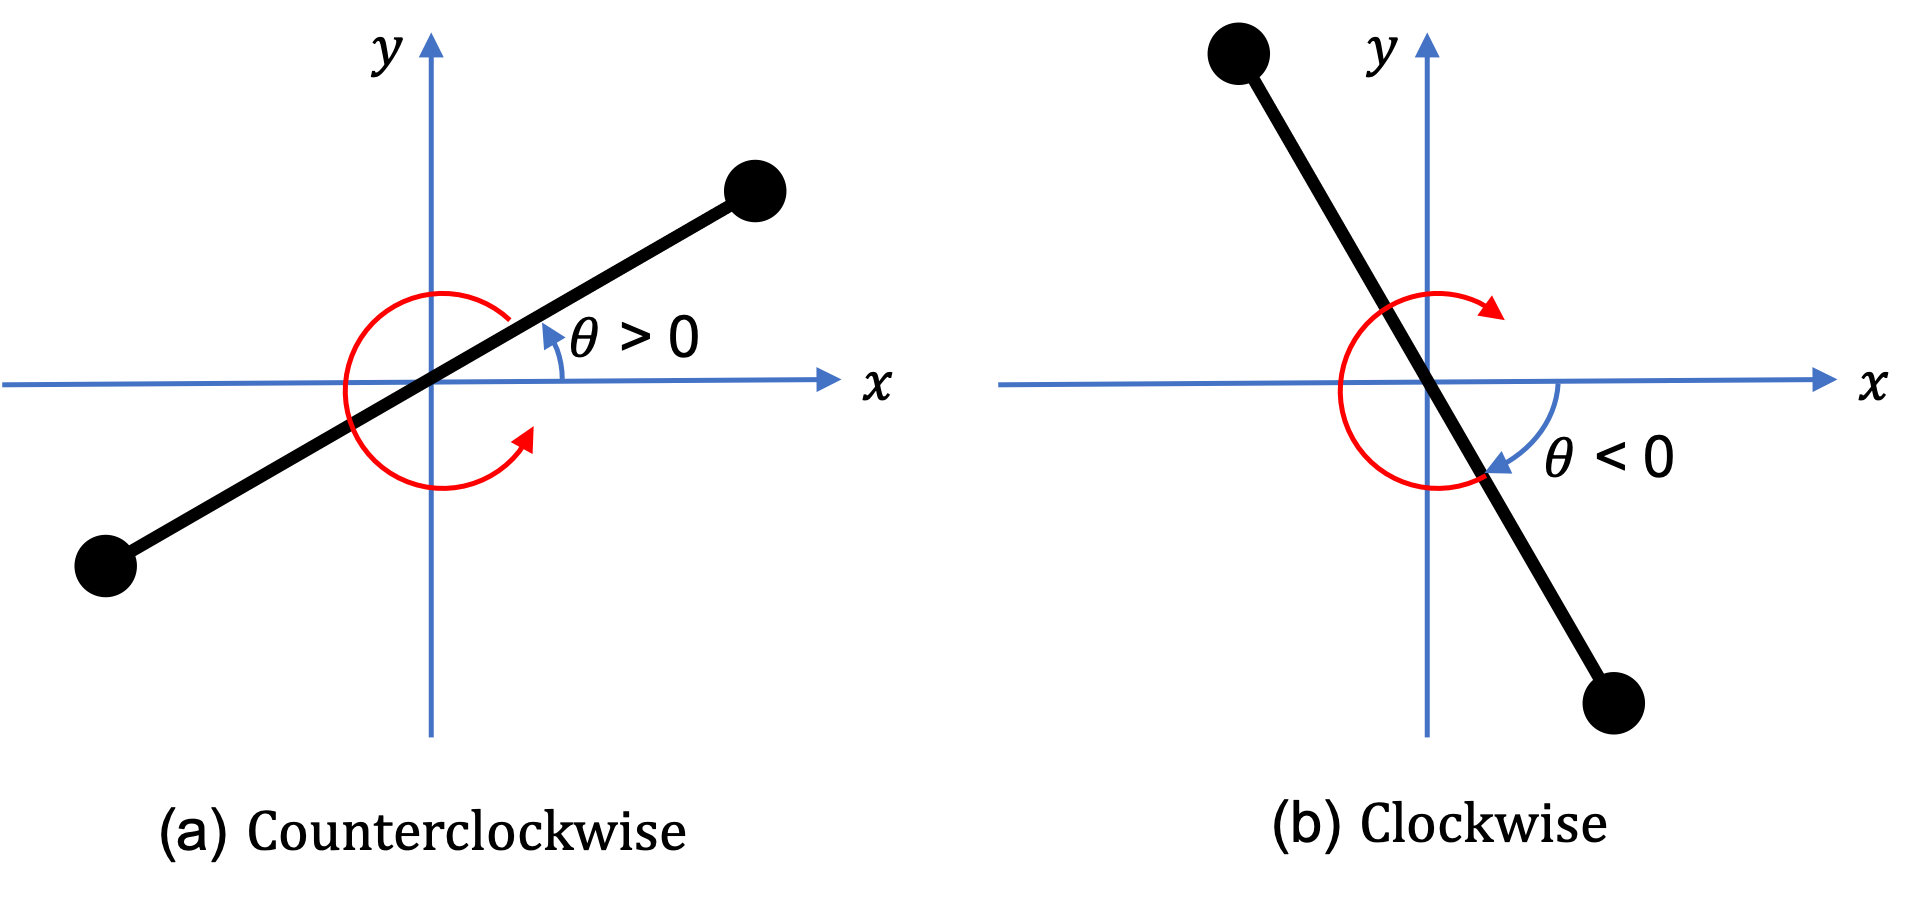 http://www.physicsbootcamp.org/images/rotation/sense-of-rotation-angle.png